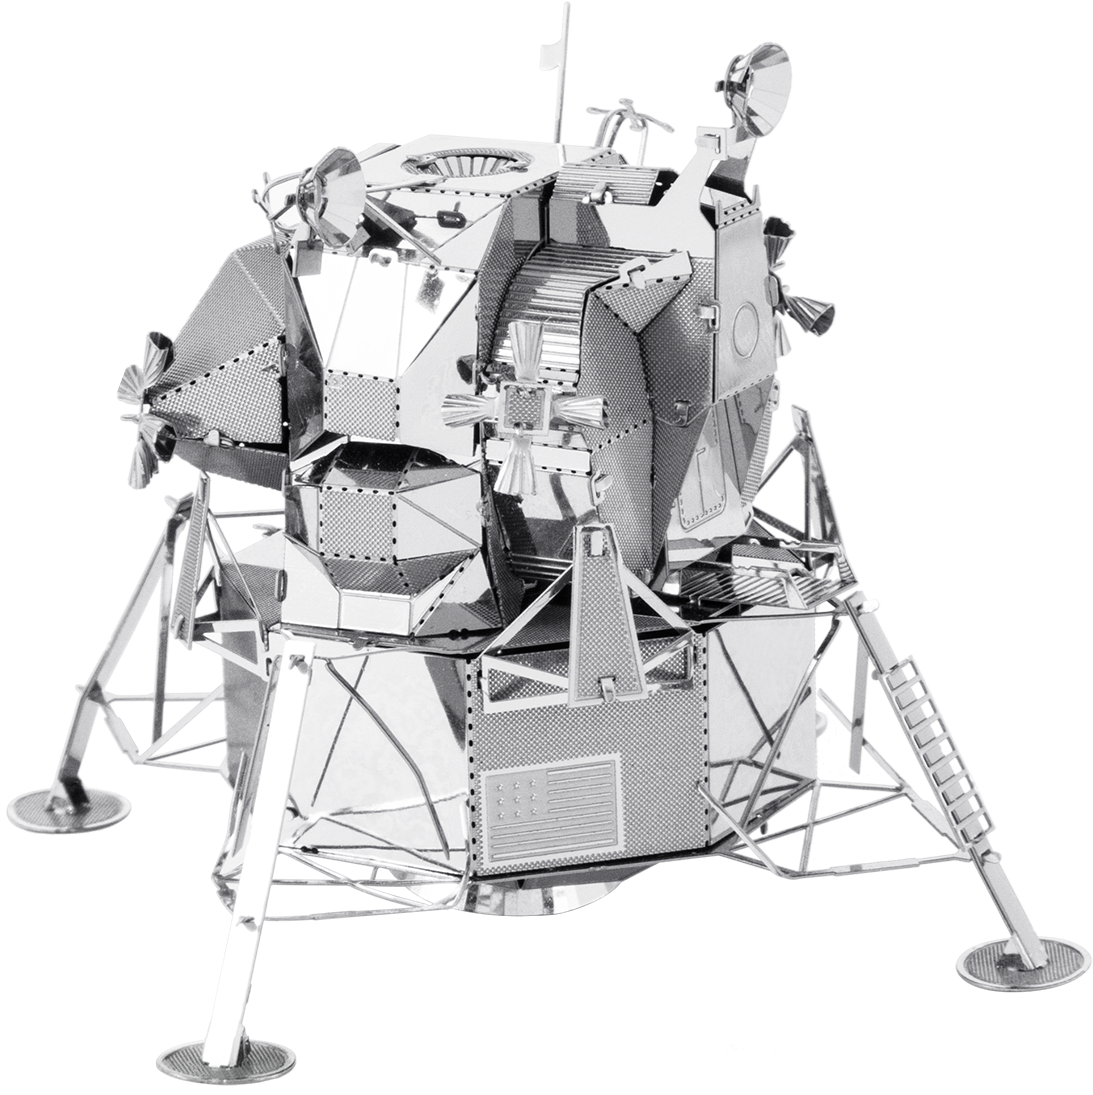 A Silver Metal Model Of A Space Rover